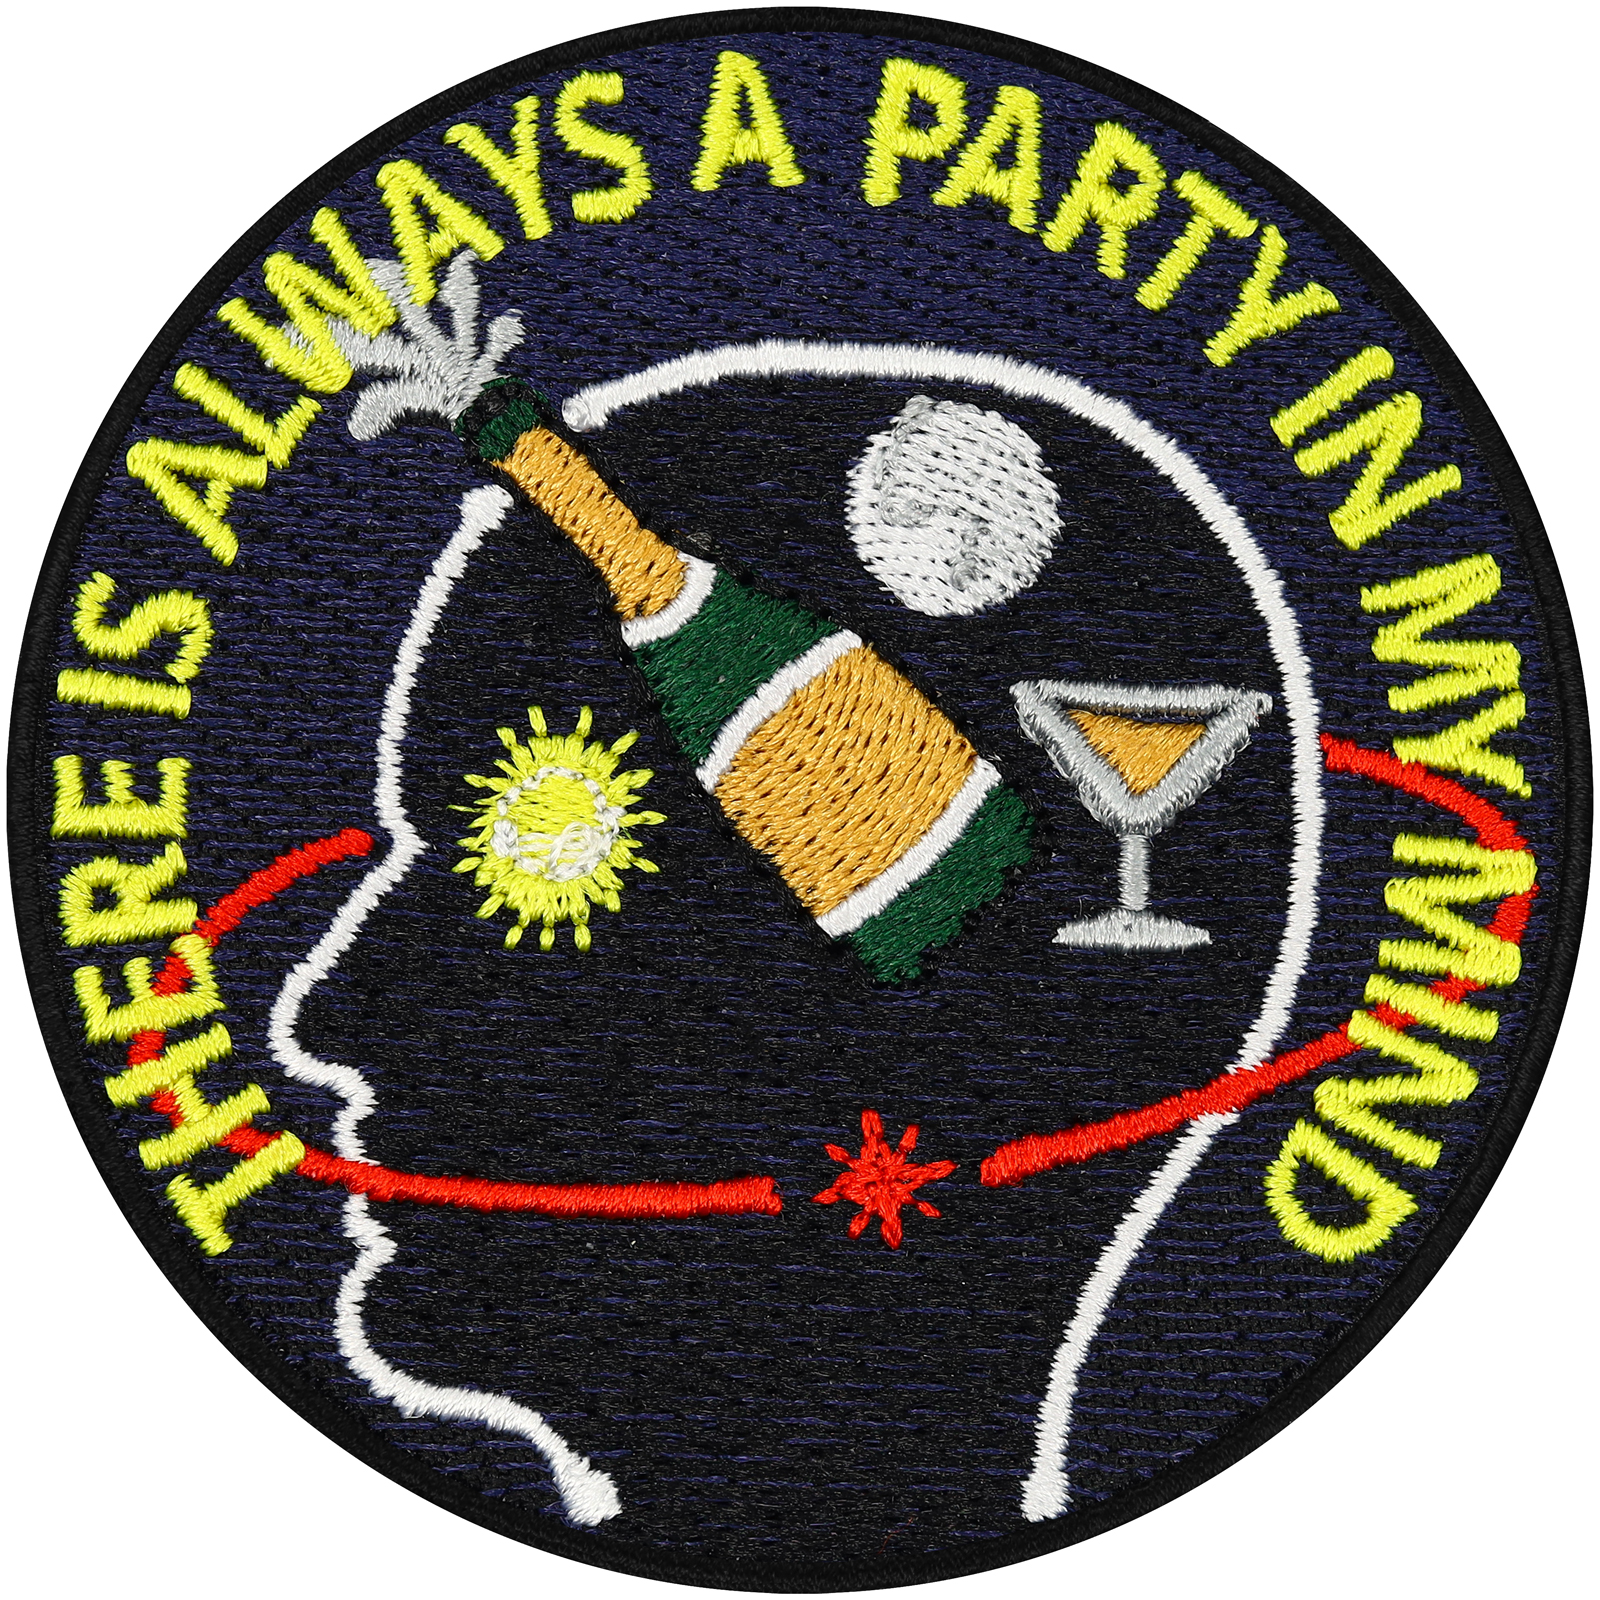 There is always a party in my mind - Patch